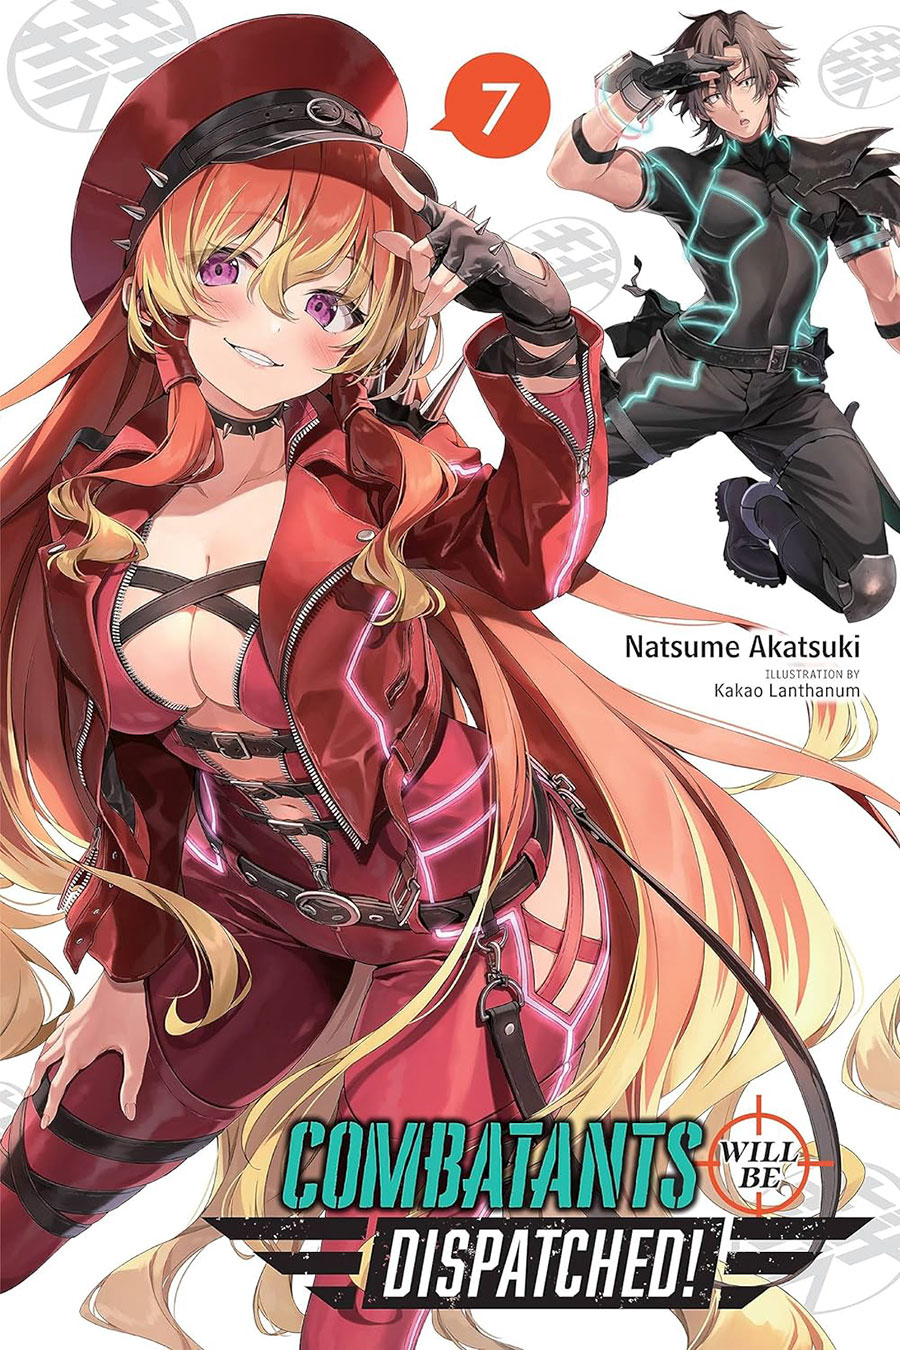 Combatants Will Be Dispatched Light Novel Vol 7